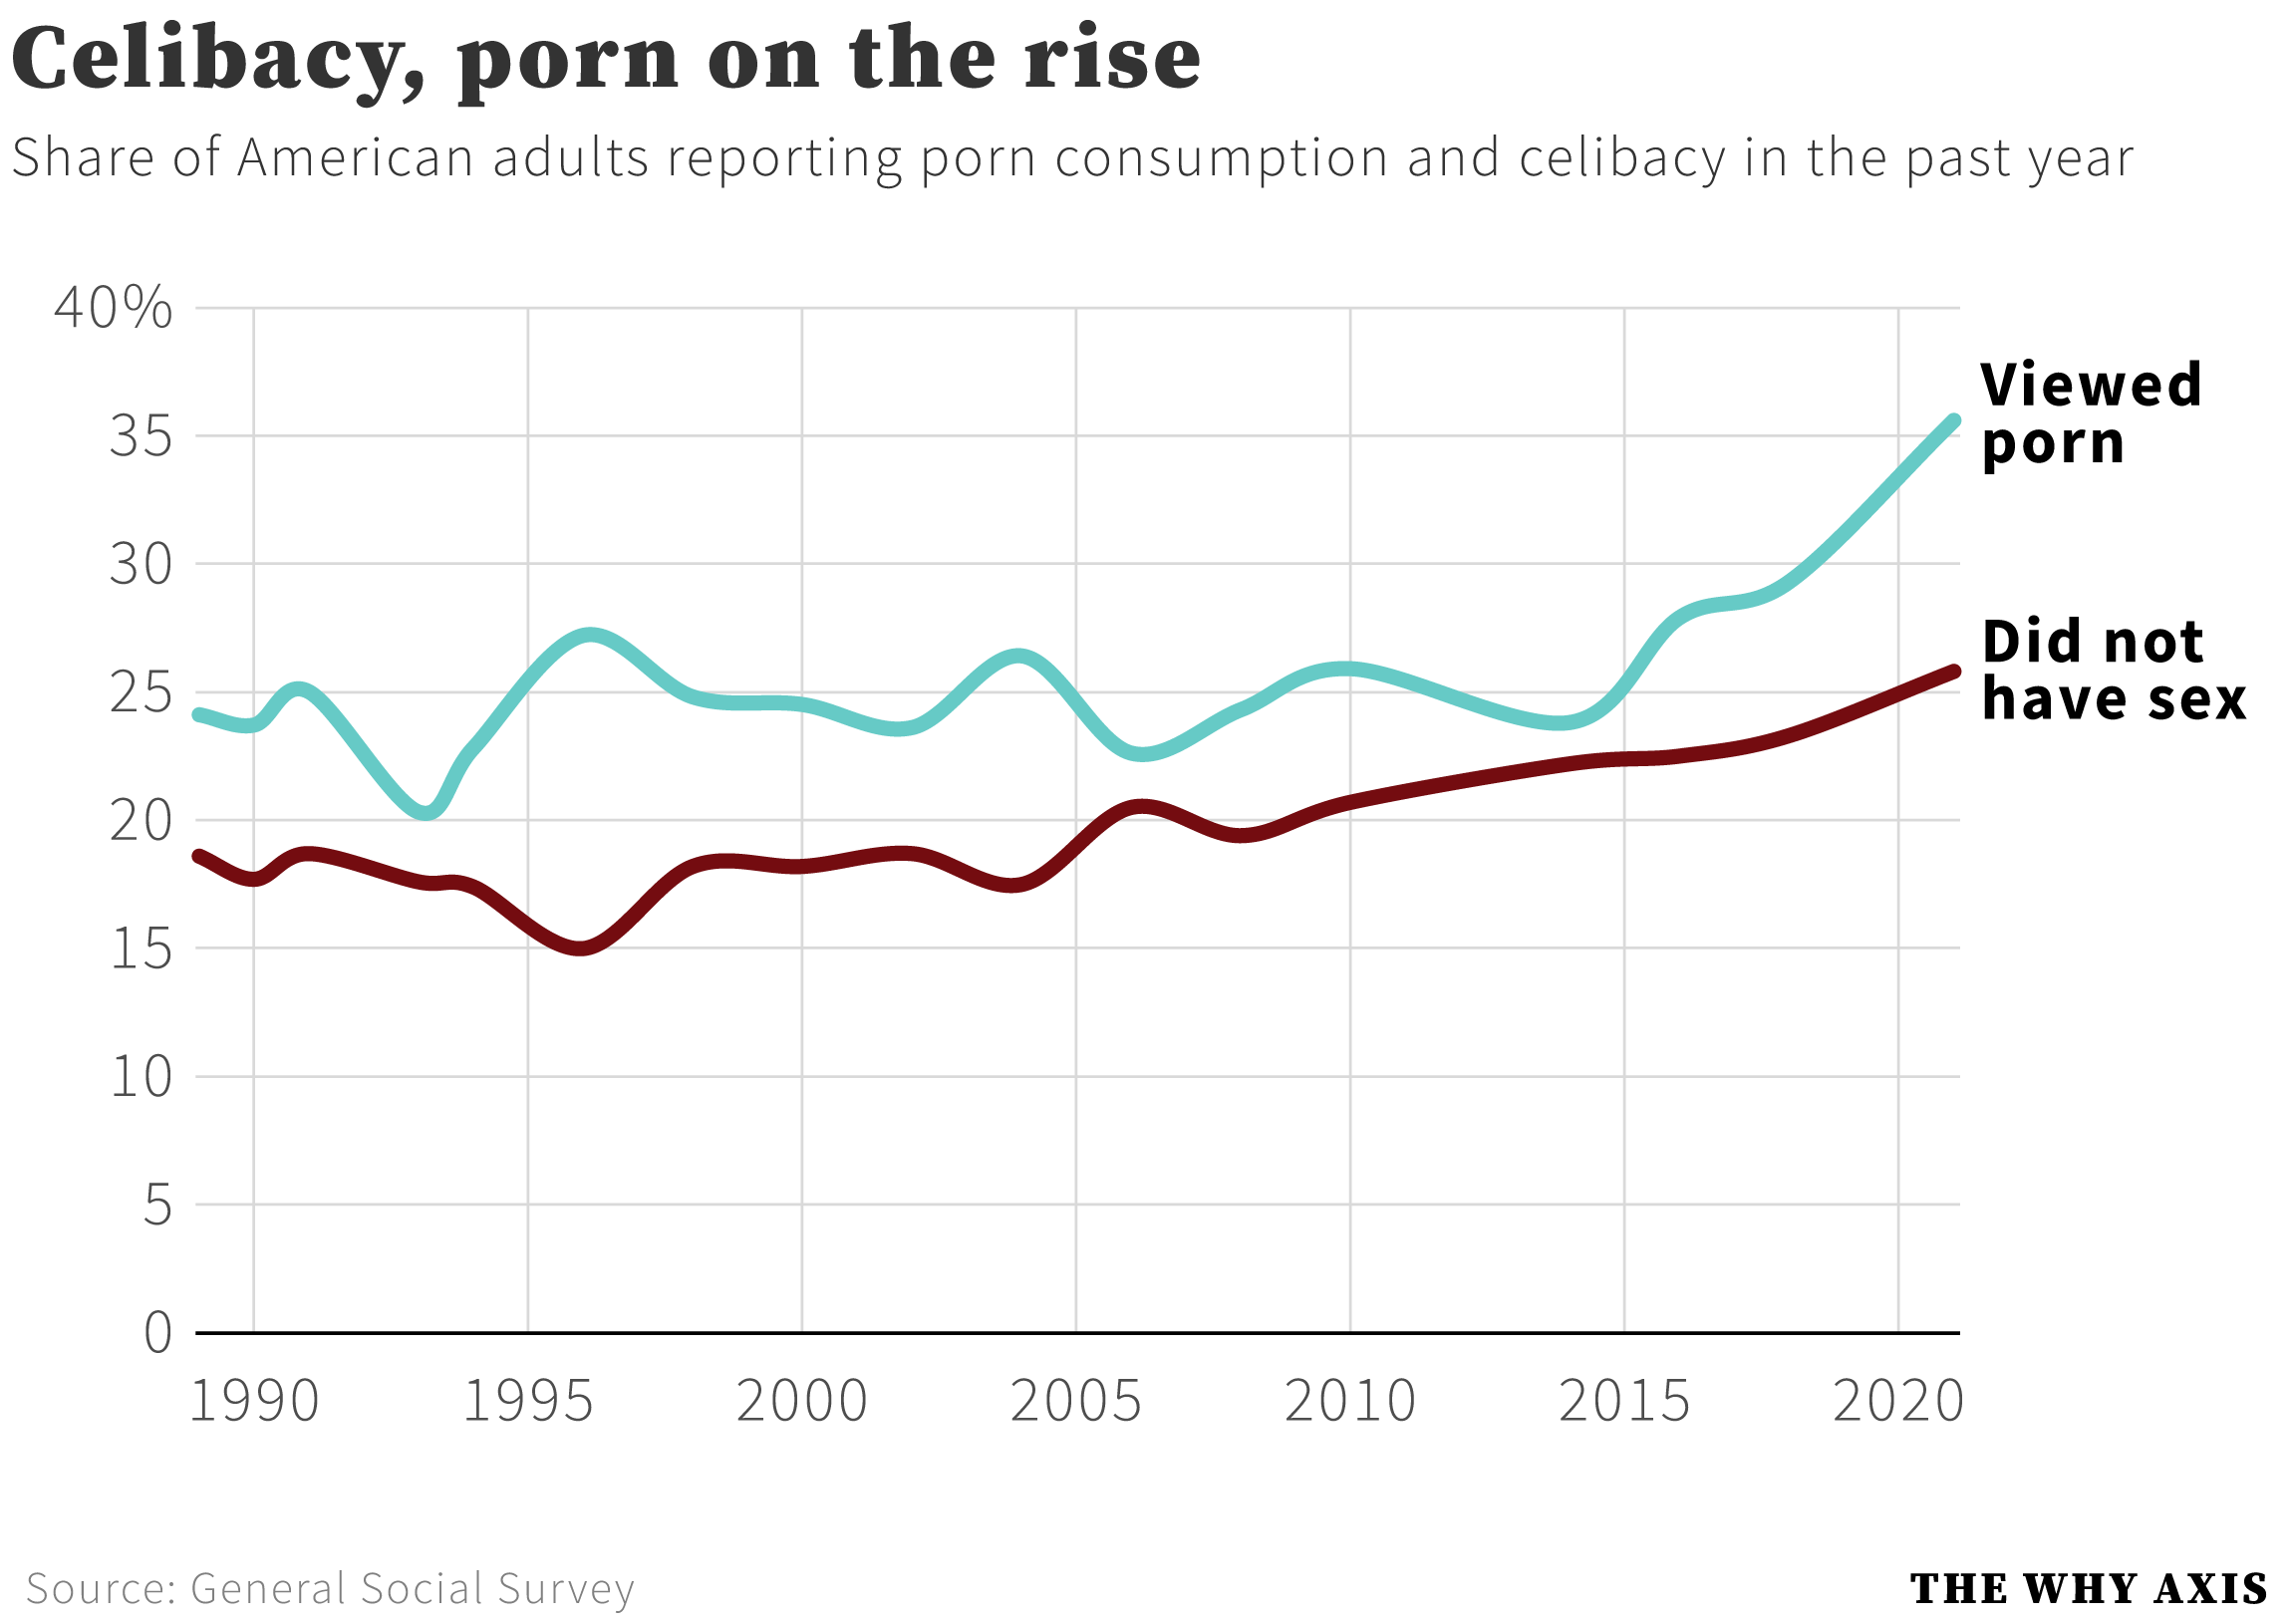 Seccx - More porn, less sex: how the pandemic scrambled American intimacy